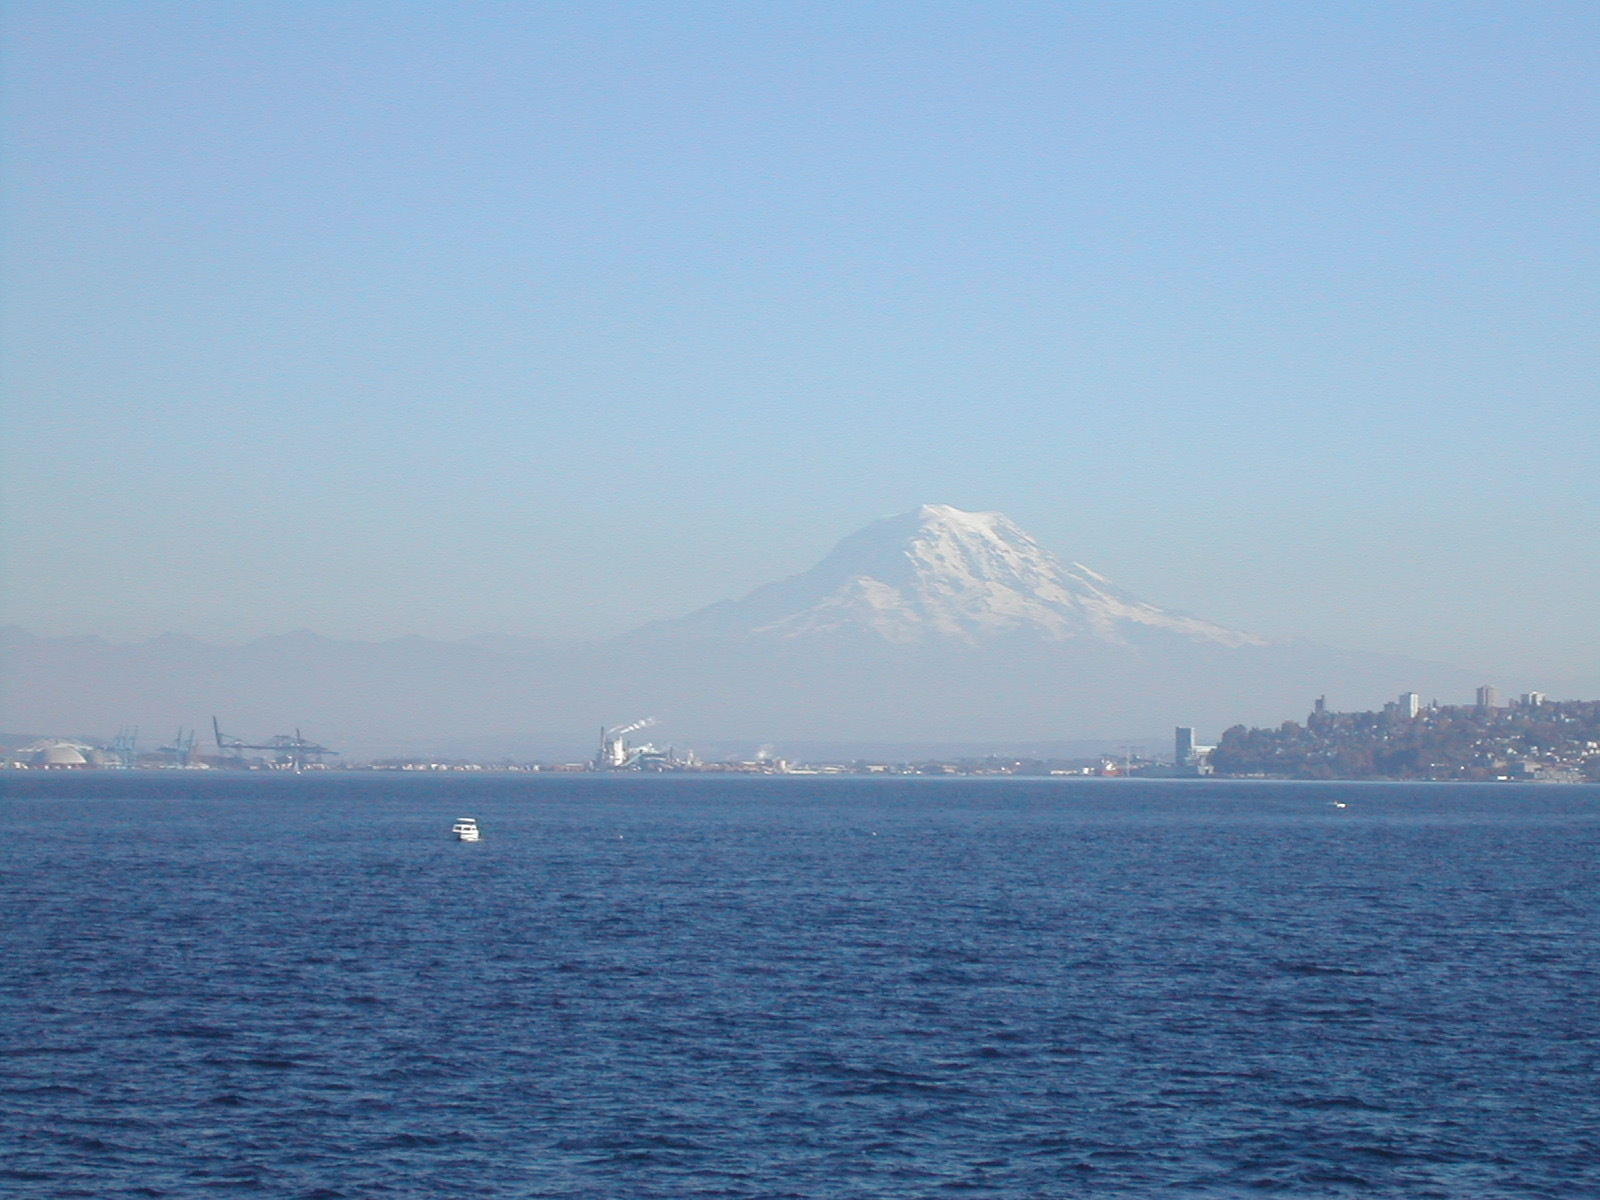 Mount Rainier from the water